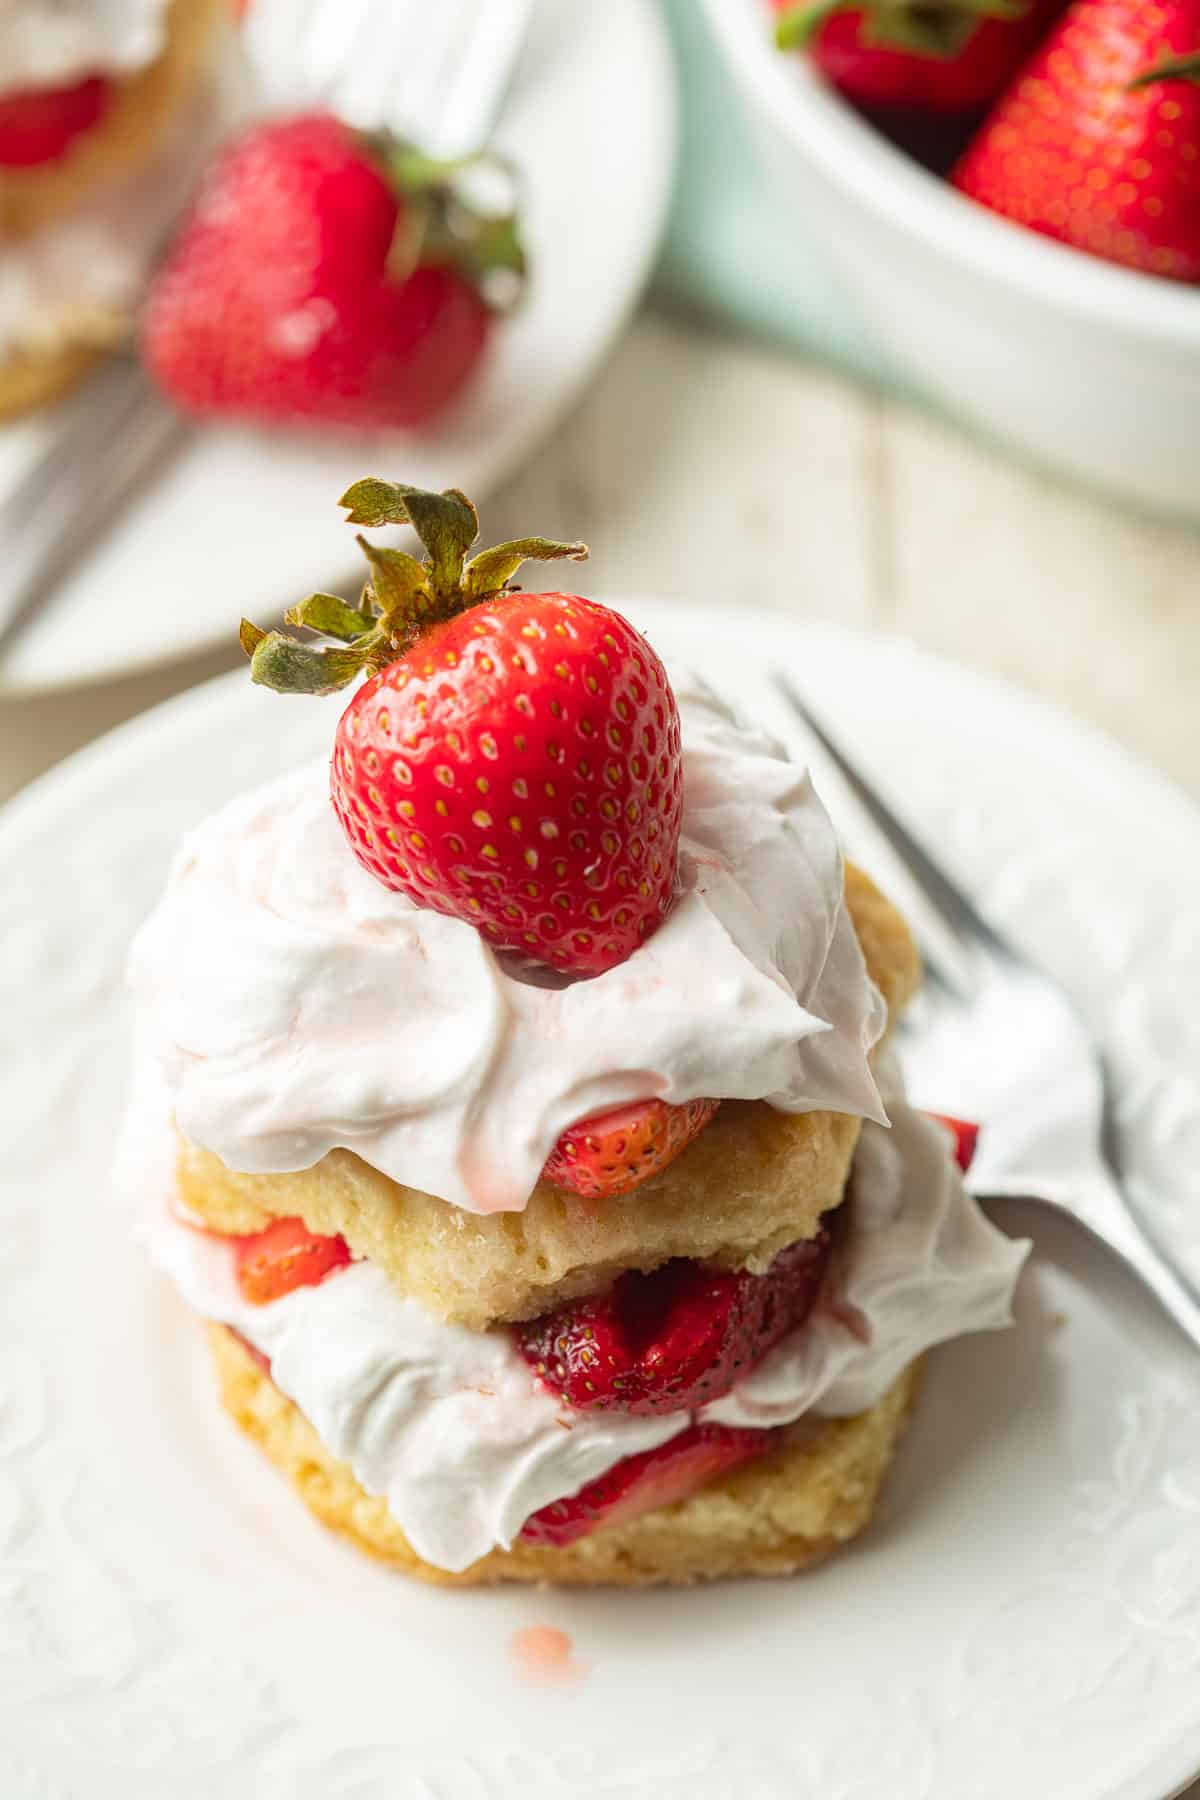 Vegan Strawberry Shortcake on a plate with fork.